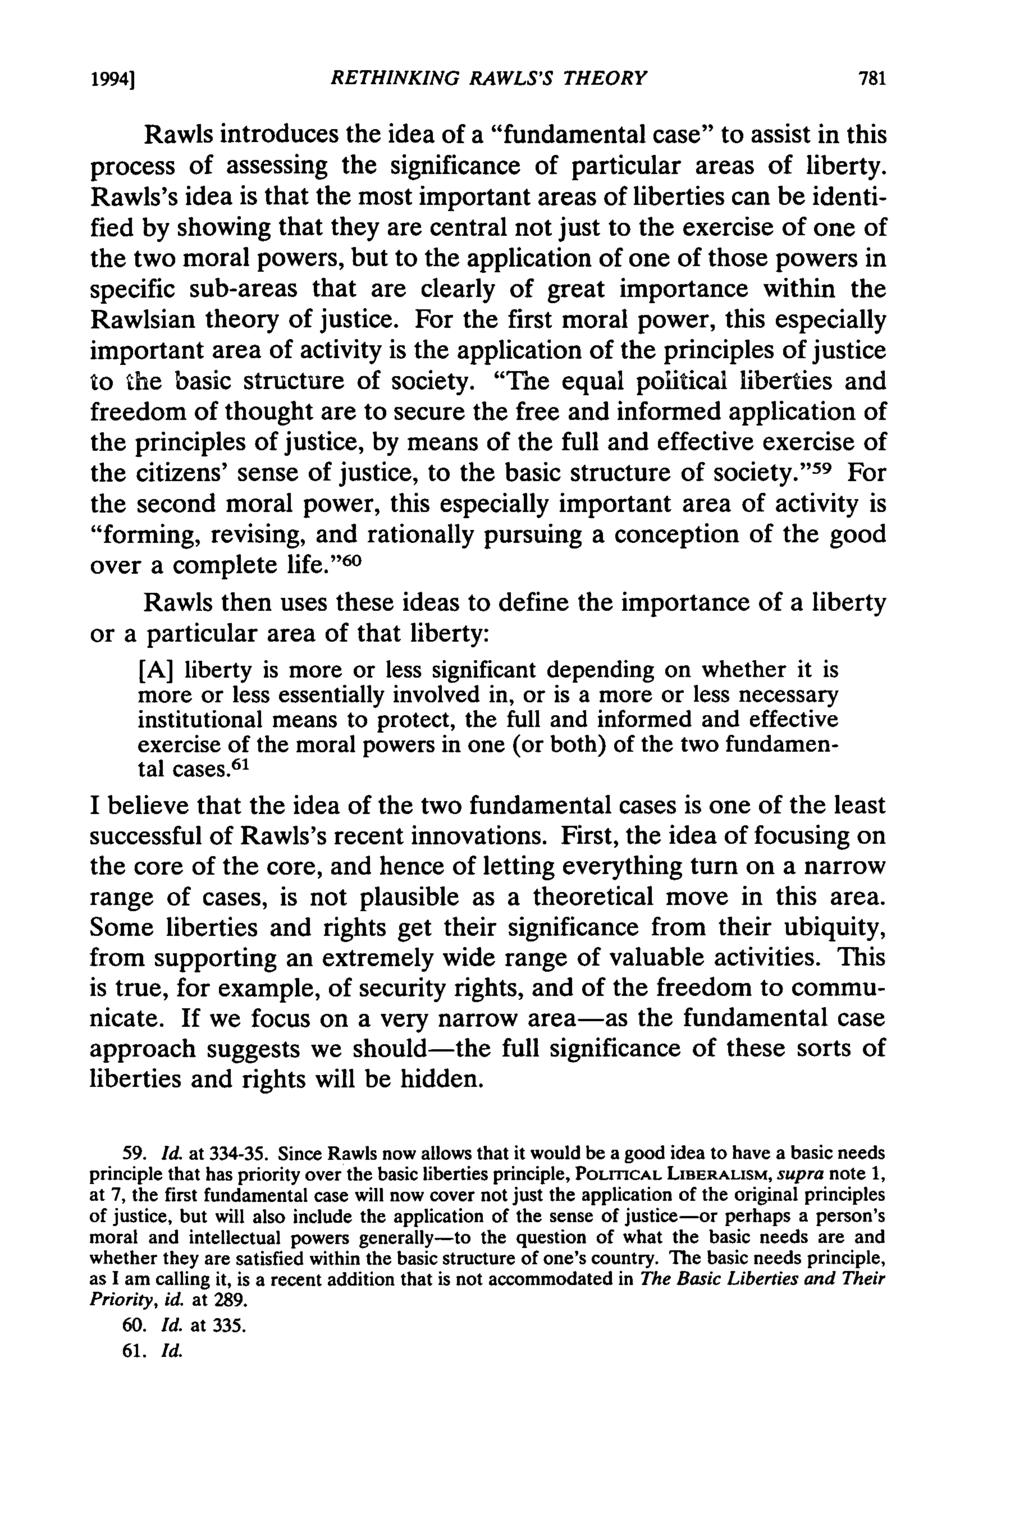 19941 RETHINKING RAWLS'S THEORY Rawls introduces the idea of a "fundamental case" to assist in this process of assessing the significance of particular areas of liberty.